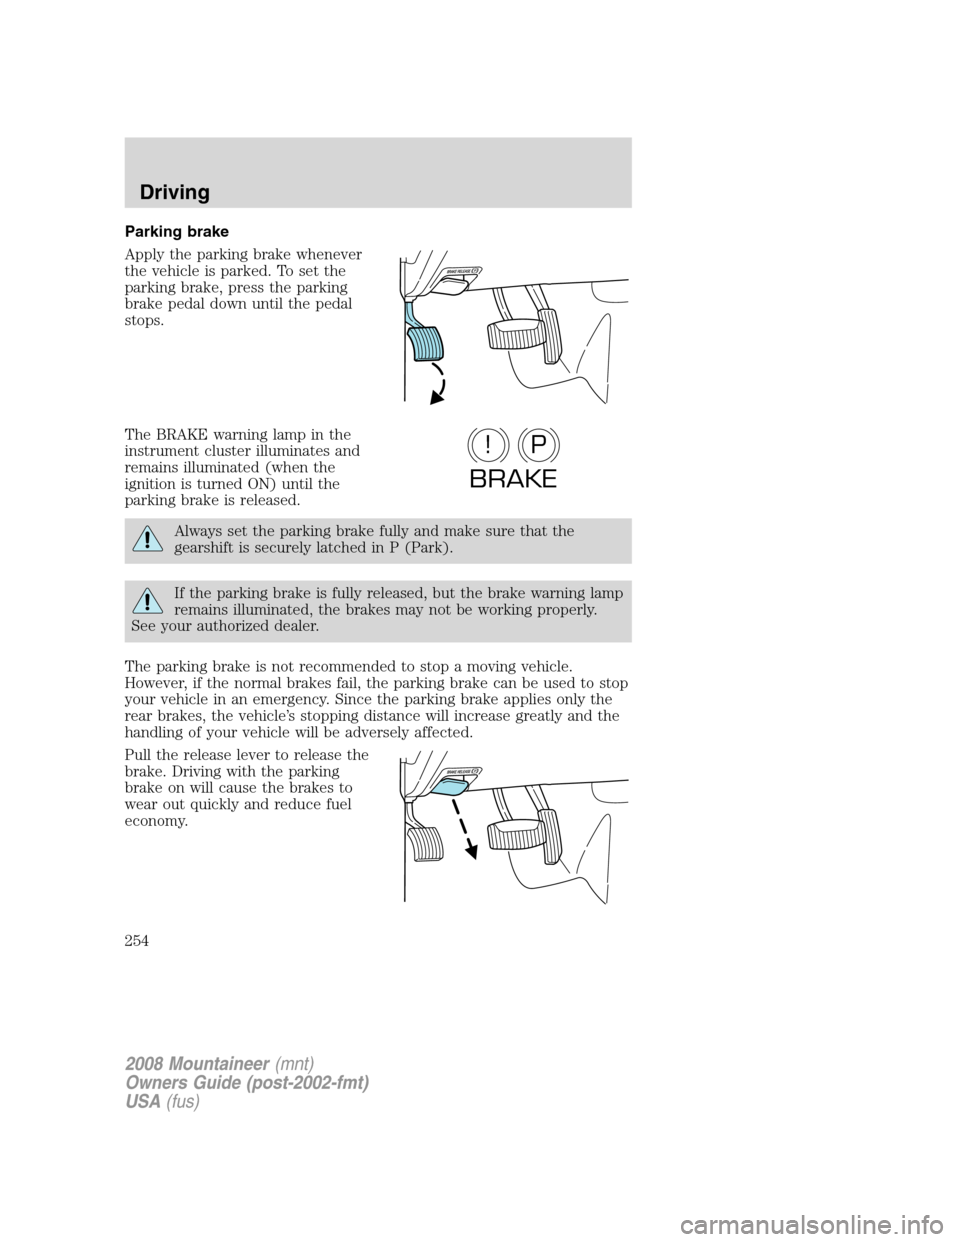 Mercury Mountaineer 2008  s Owners Guide Parking brake
Apply the parking brake whenever
the vehicle is parked. To set the
parking brake, press the parking
brake pedal down until the pedal
stops.
The BRAKE warning lamp in the
instrument clust